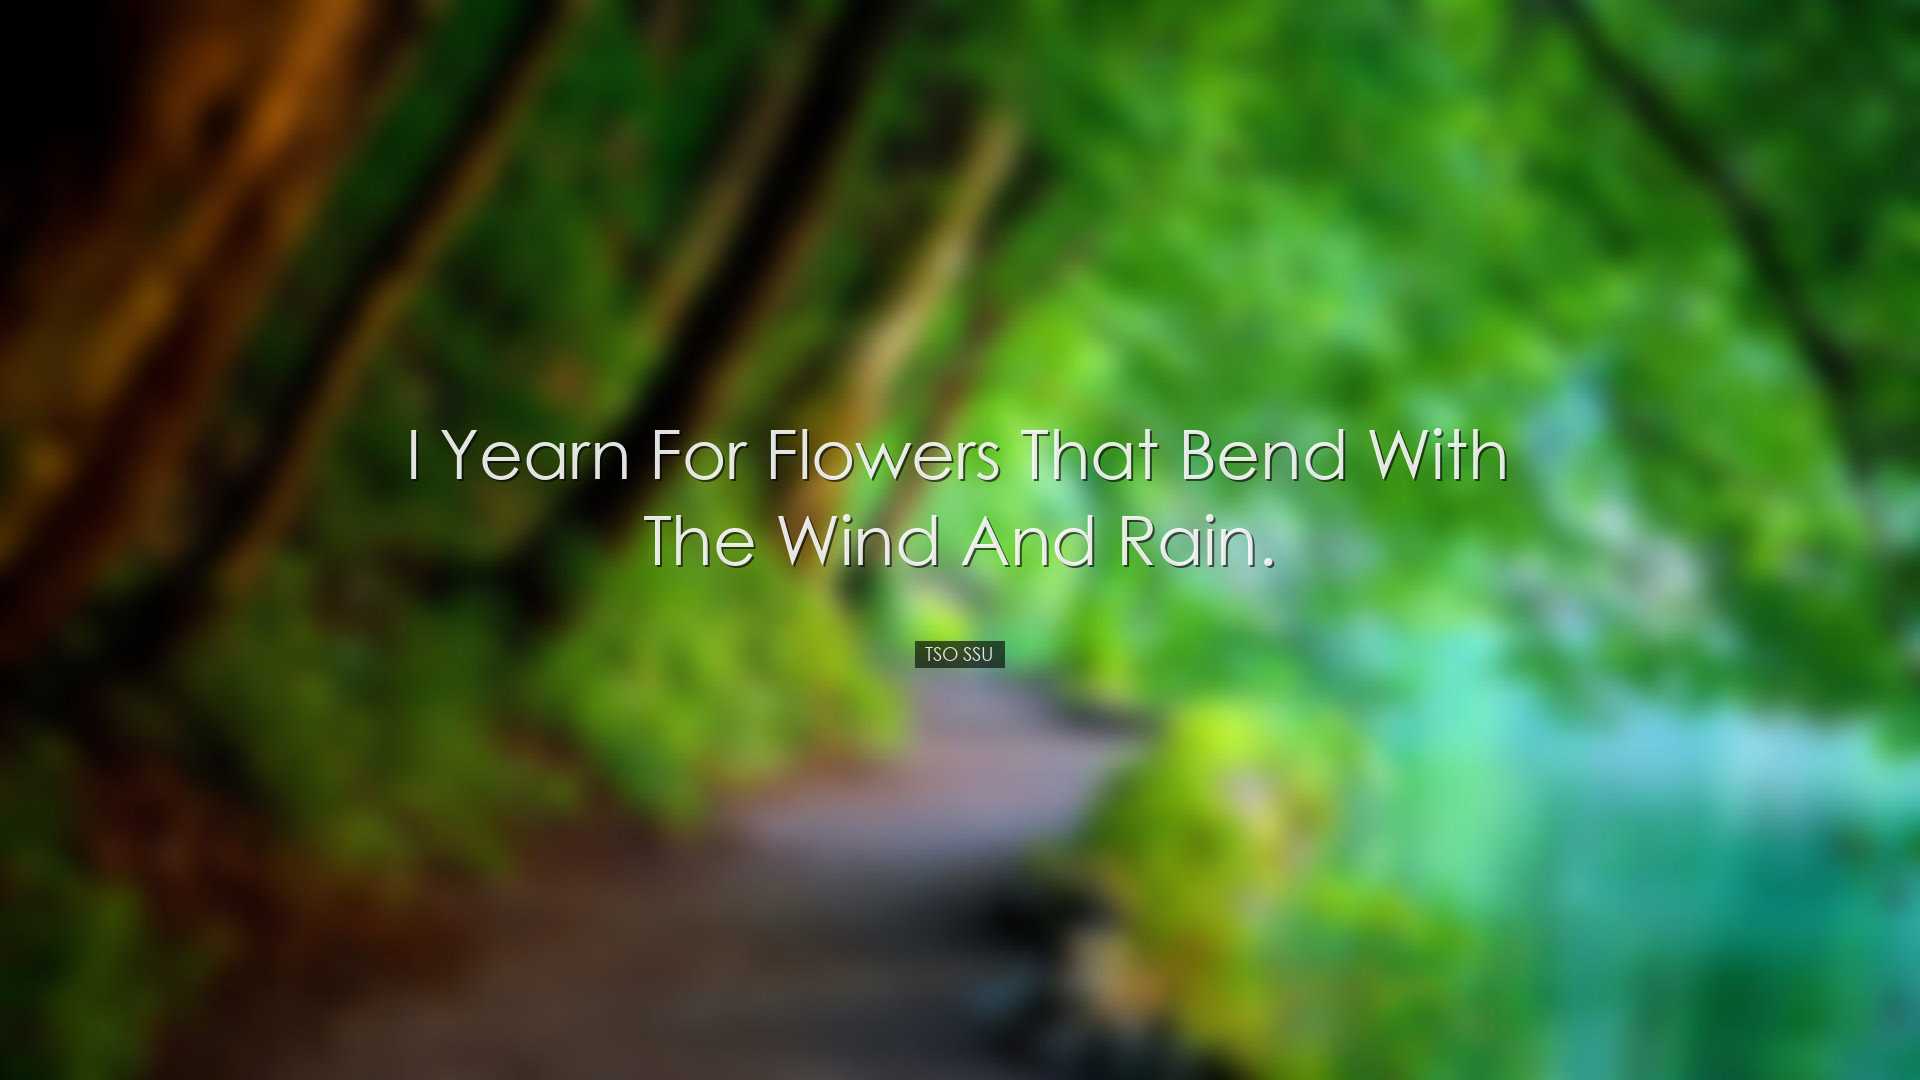 I yearn for flowers that bend with the wind and rain. - Tso Ssu